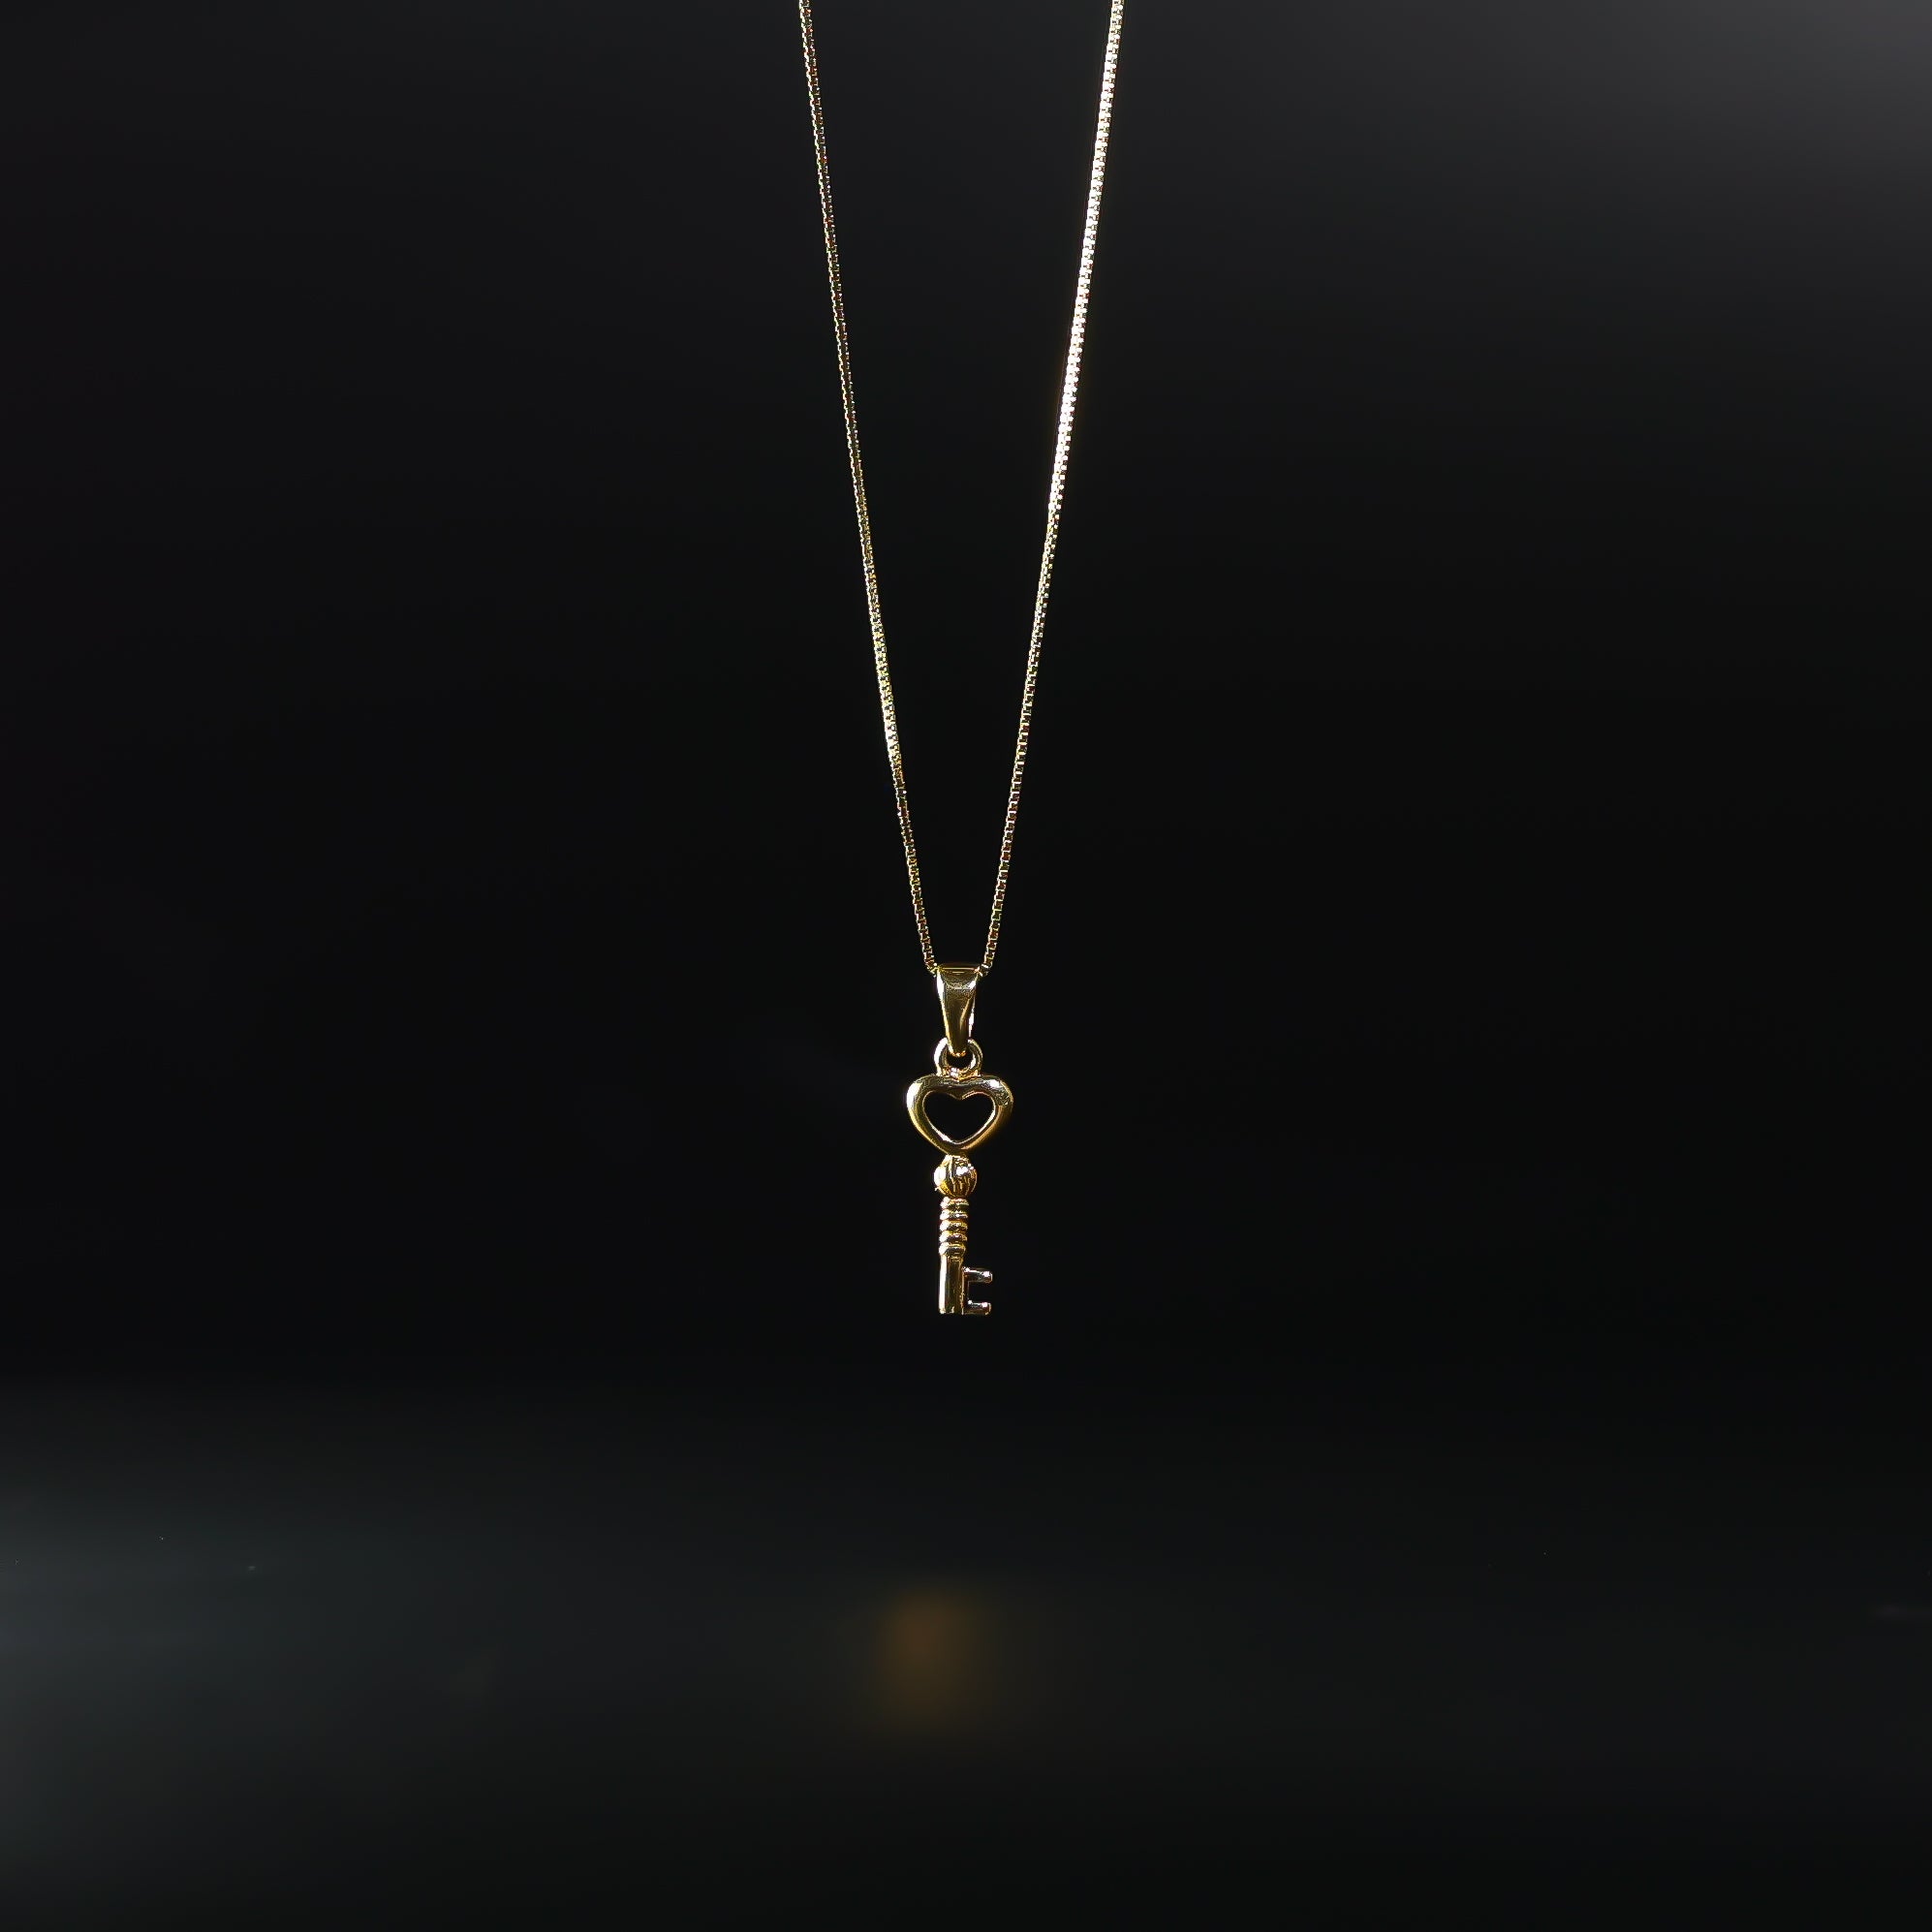 Gold Key To My Heart Pendant Model-468 - Charlie & Co. Jewelry